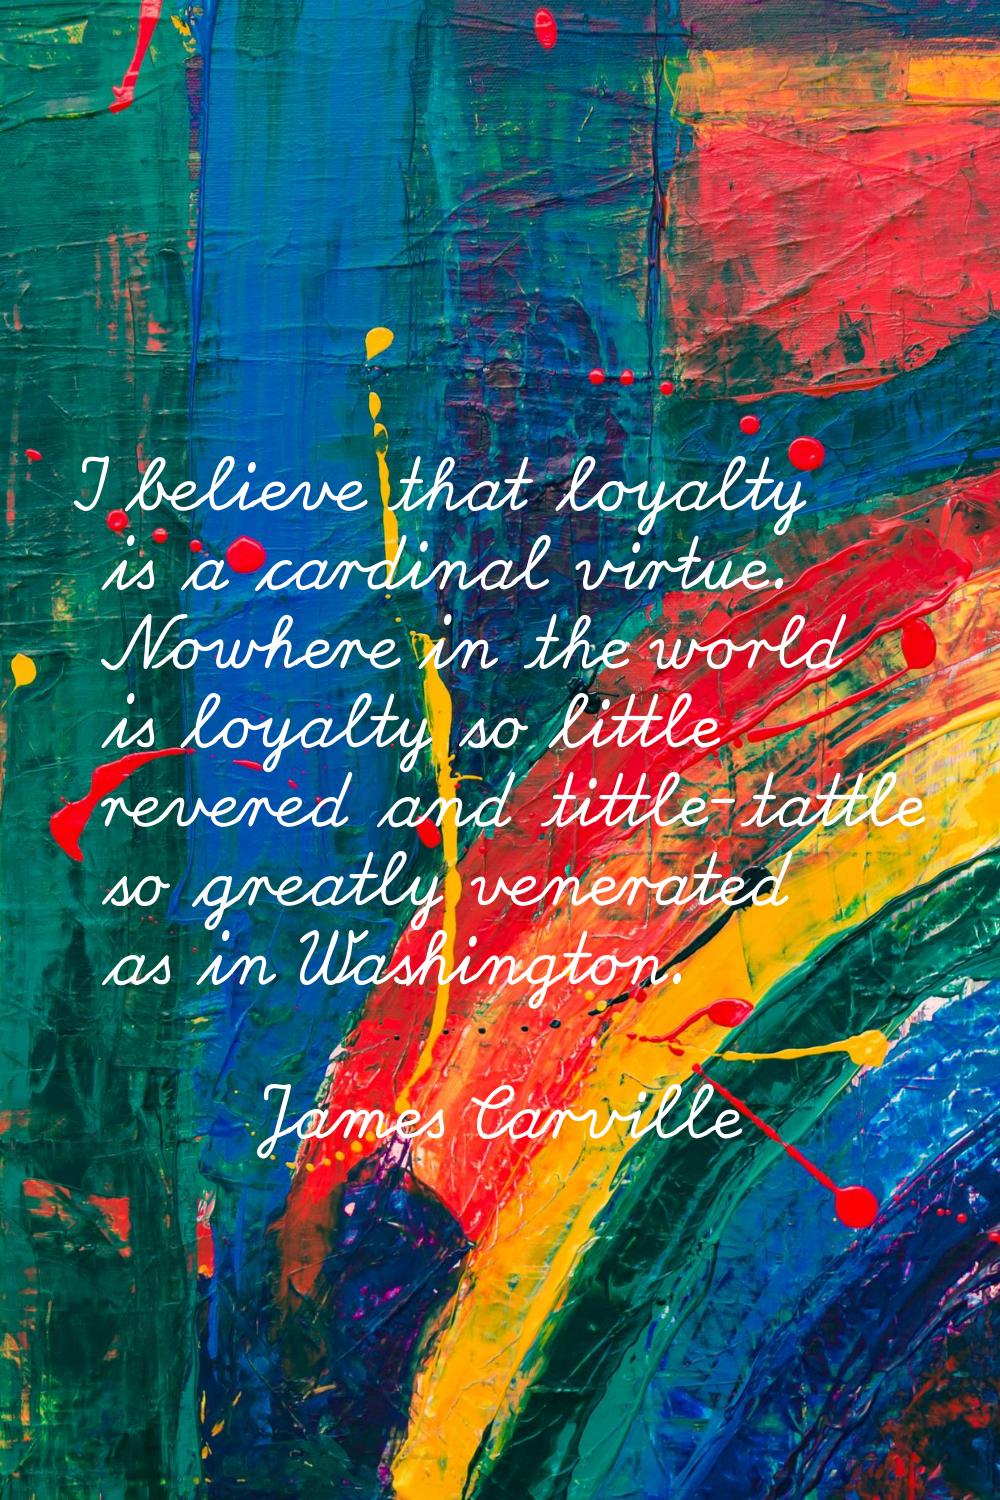 I believe that loyalty is a cardinal virtue. Nowhere in the world is loyalty so little revered and 